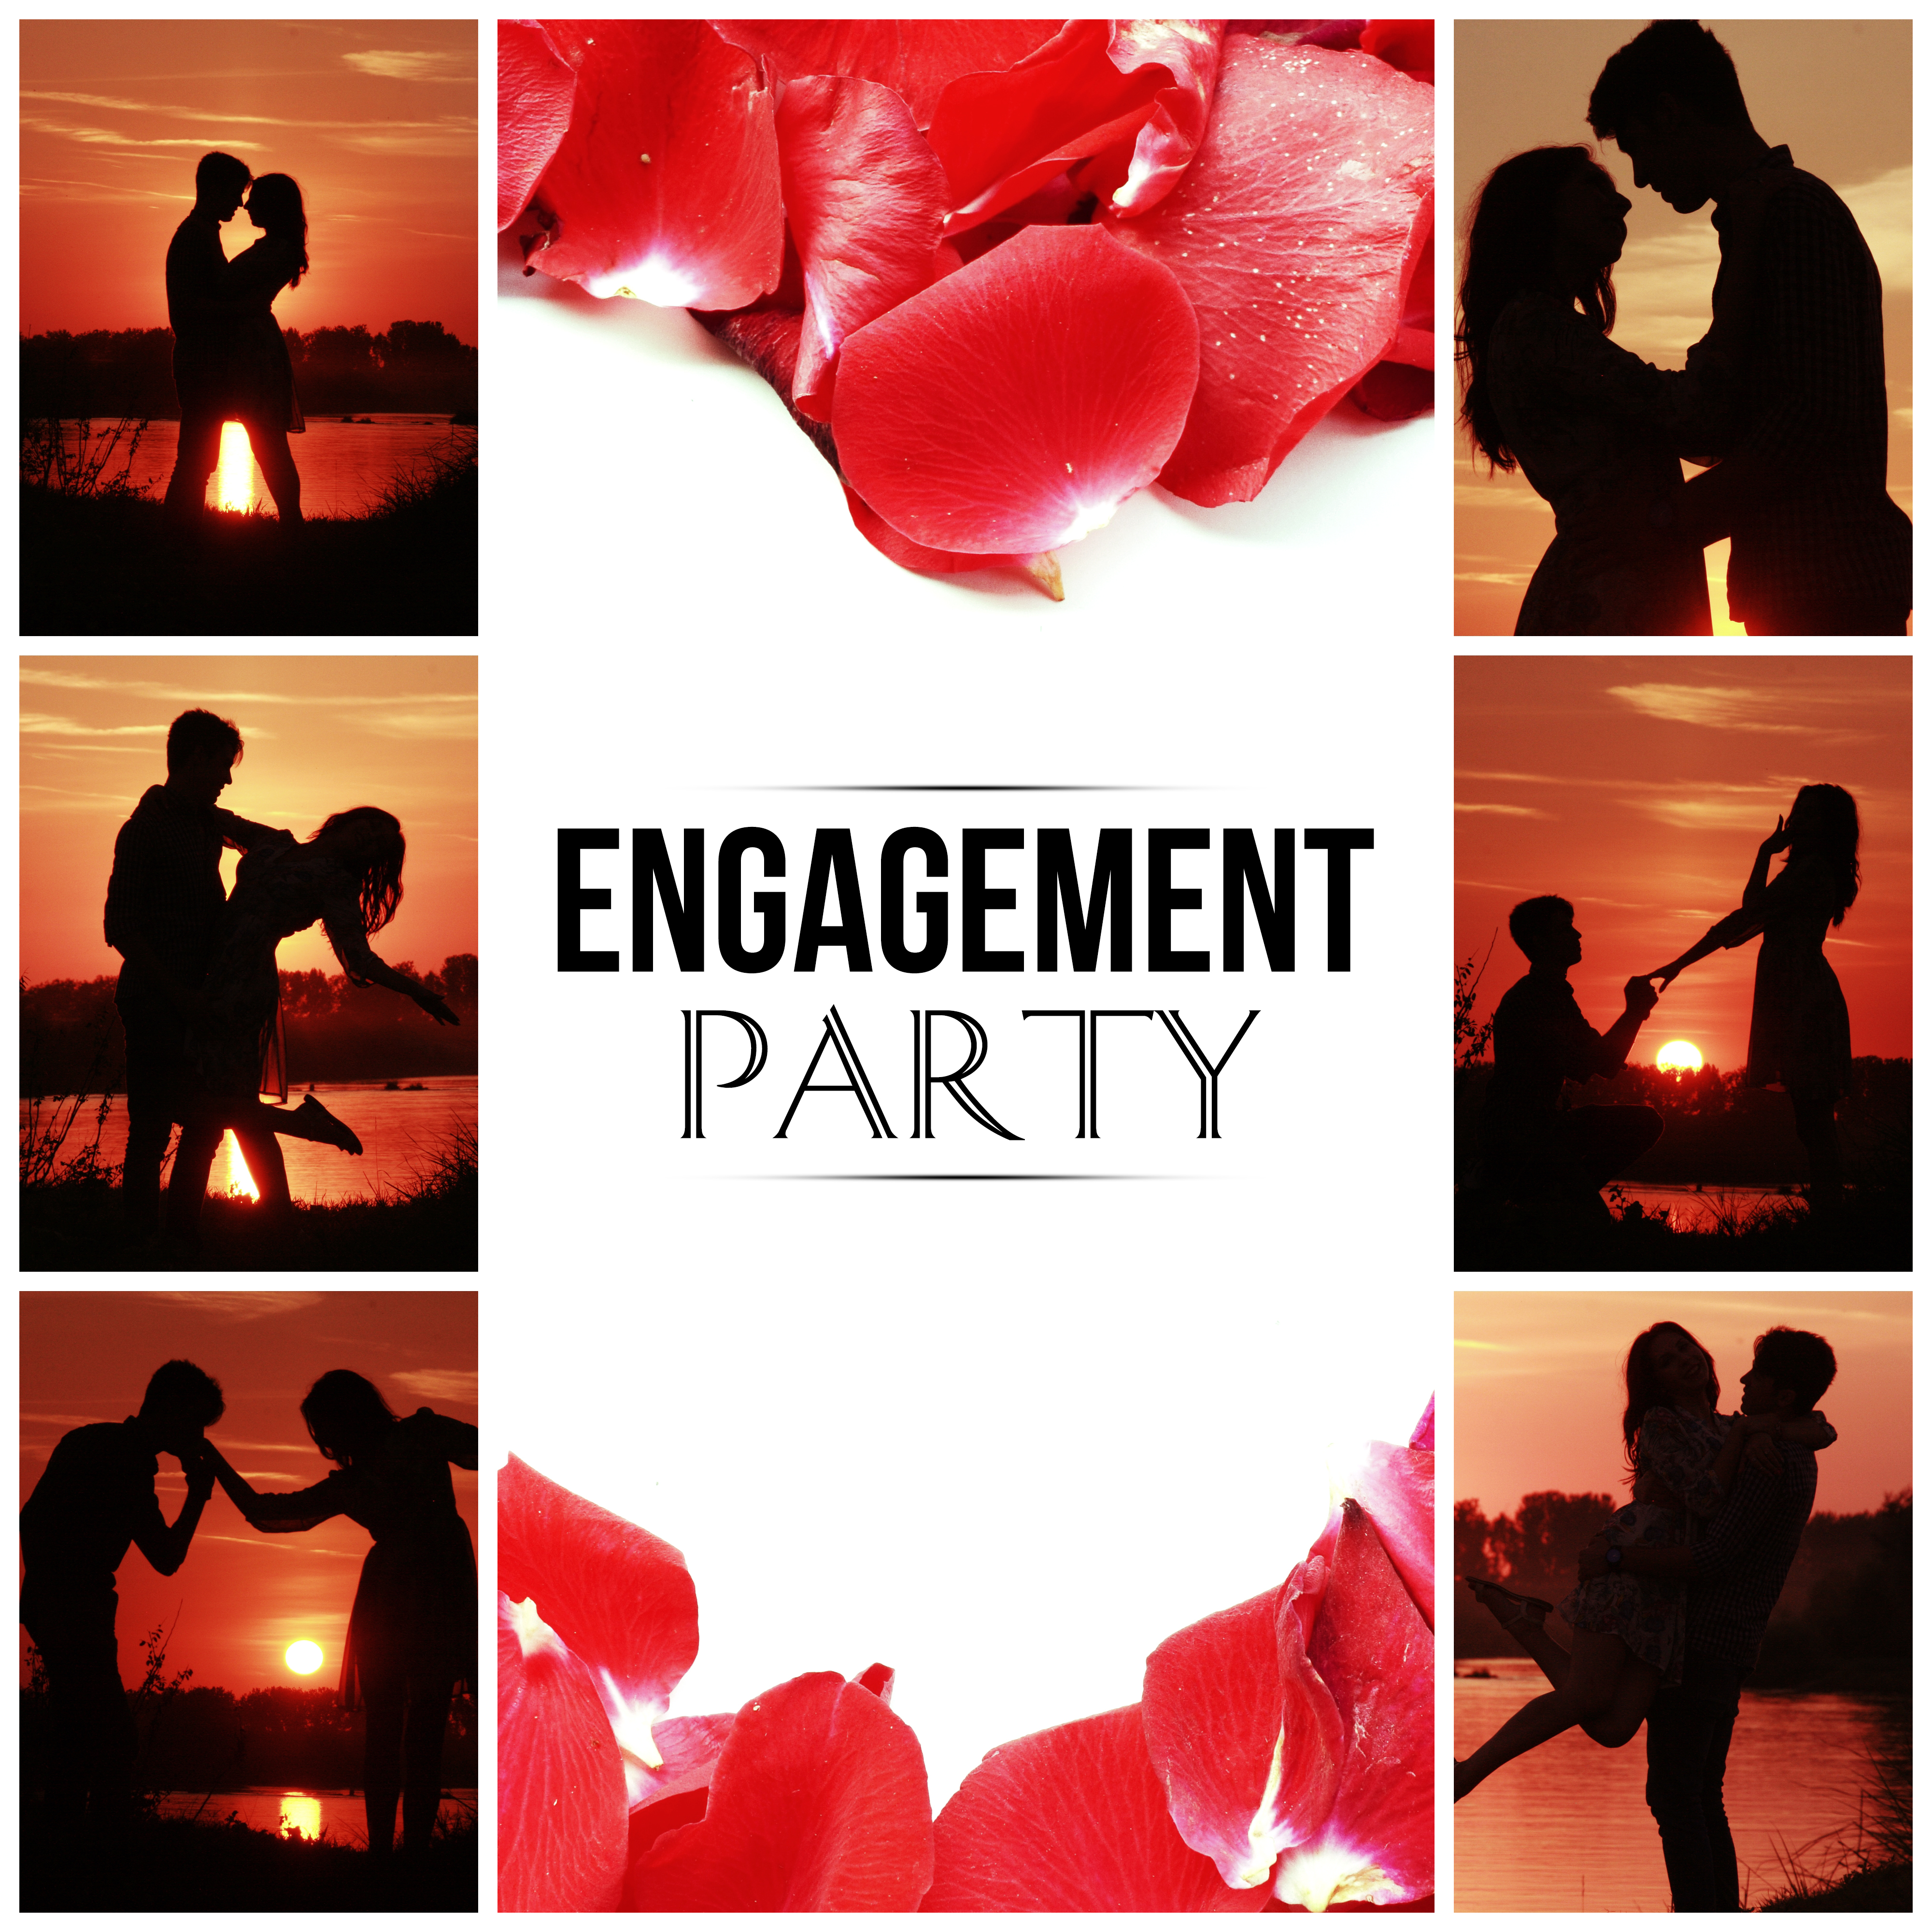 Engagement Party - Office Music, **** Music, Love Making, Cocktail Bar, Smooth Jazz